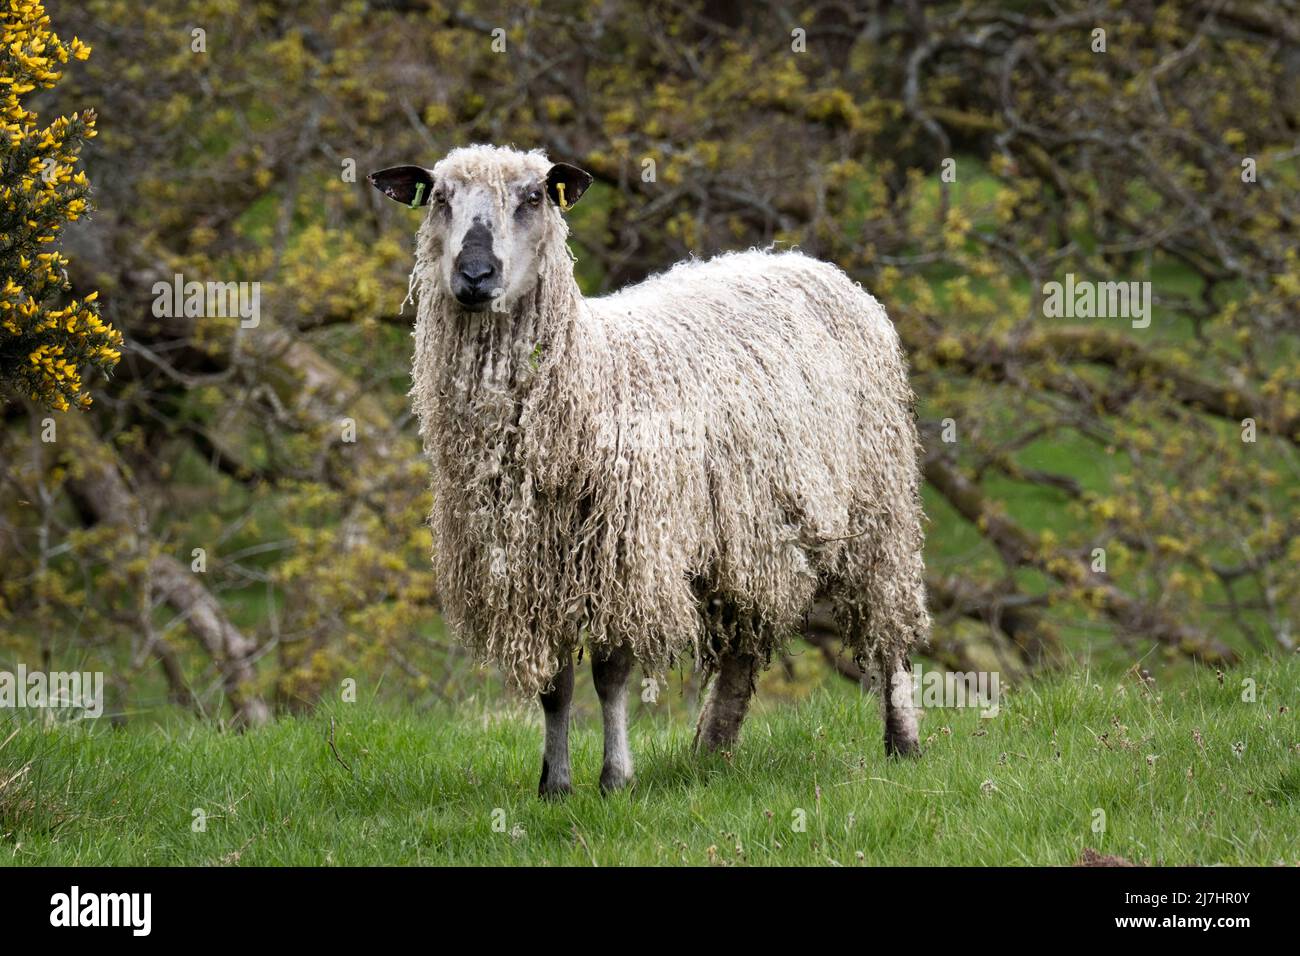 A Teeswater ewe, see at Wray, Lancashire. The Teeswater is a rare breed of longwool sheep originally from Teesdale in County Durham. Stock Photo